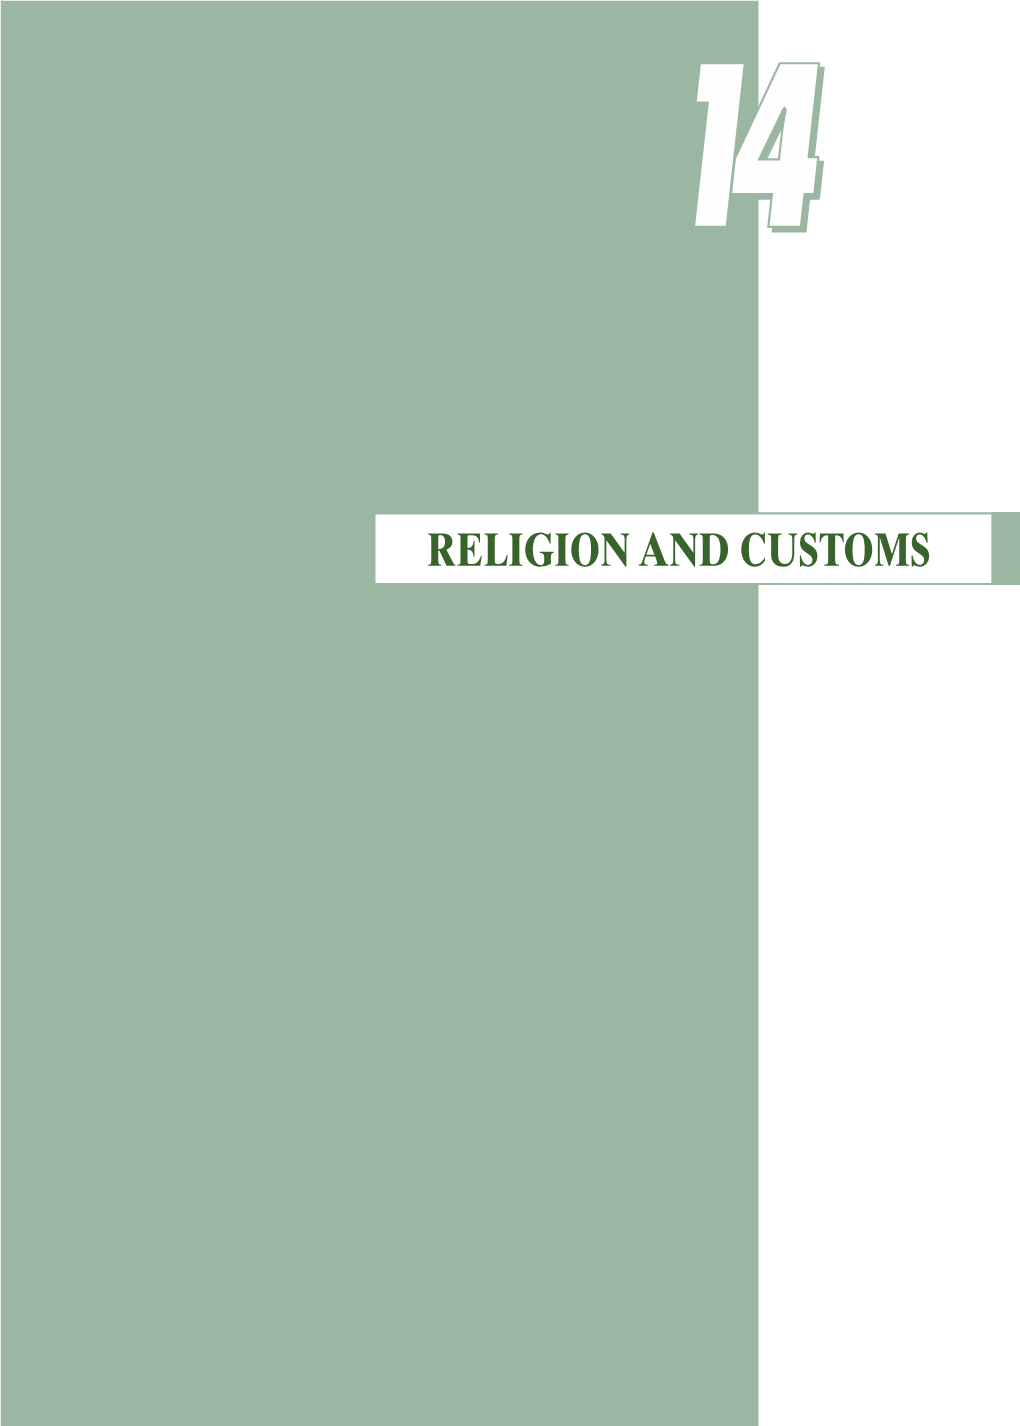 Religion and Customs